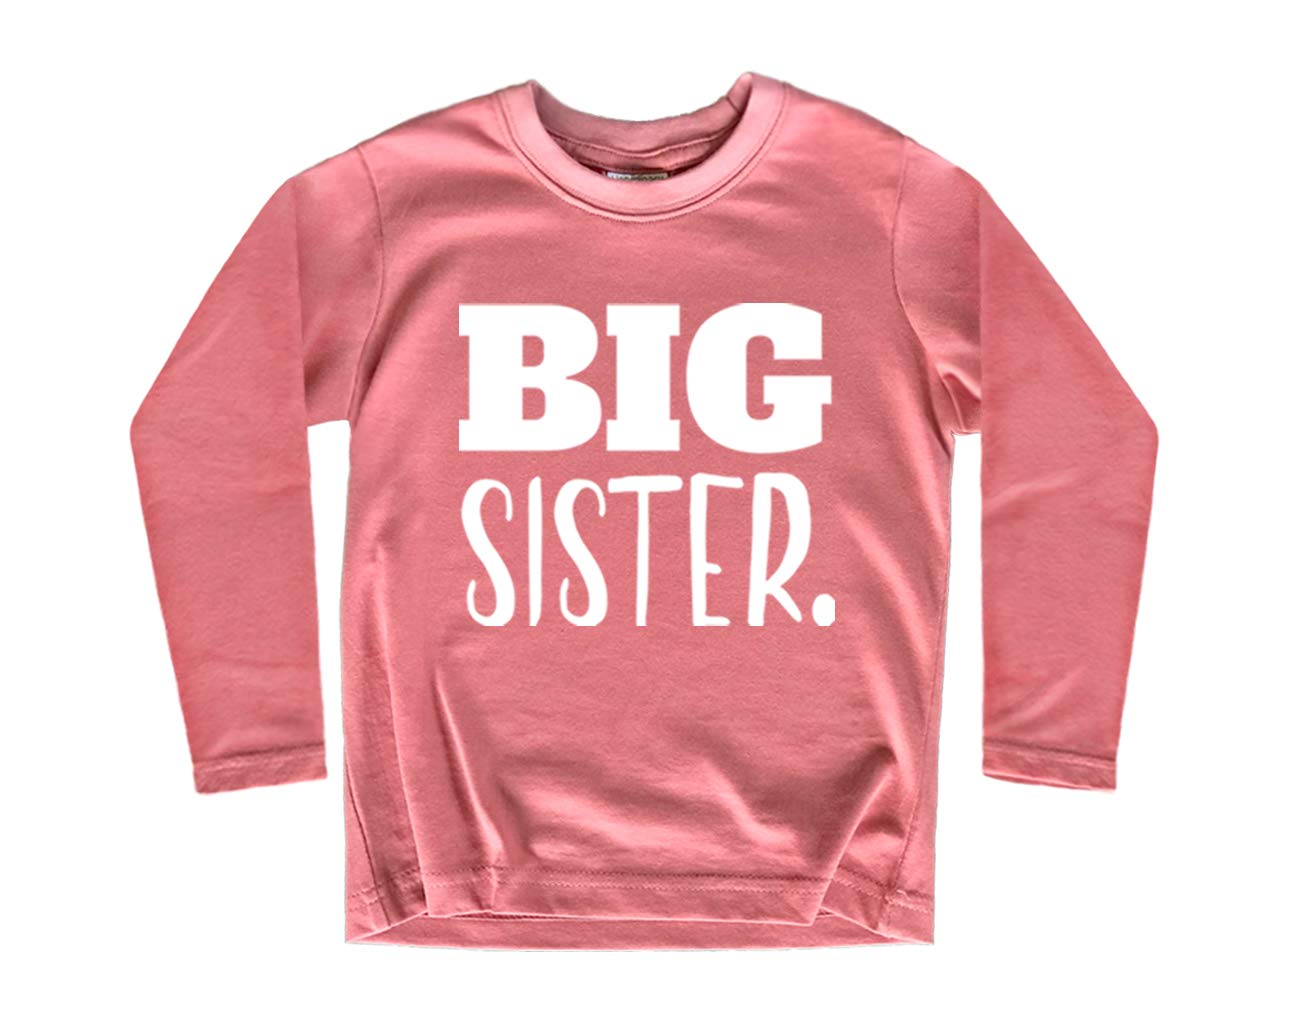 Unordinary Toddler Big Sister Shirt Big Sister Announcement Toddler Shirts Promoted to girls Outfit (Mauve - Long Sleeve, 18 Months)